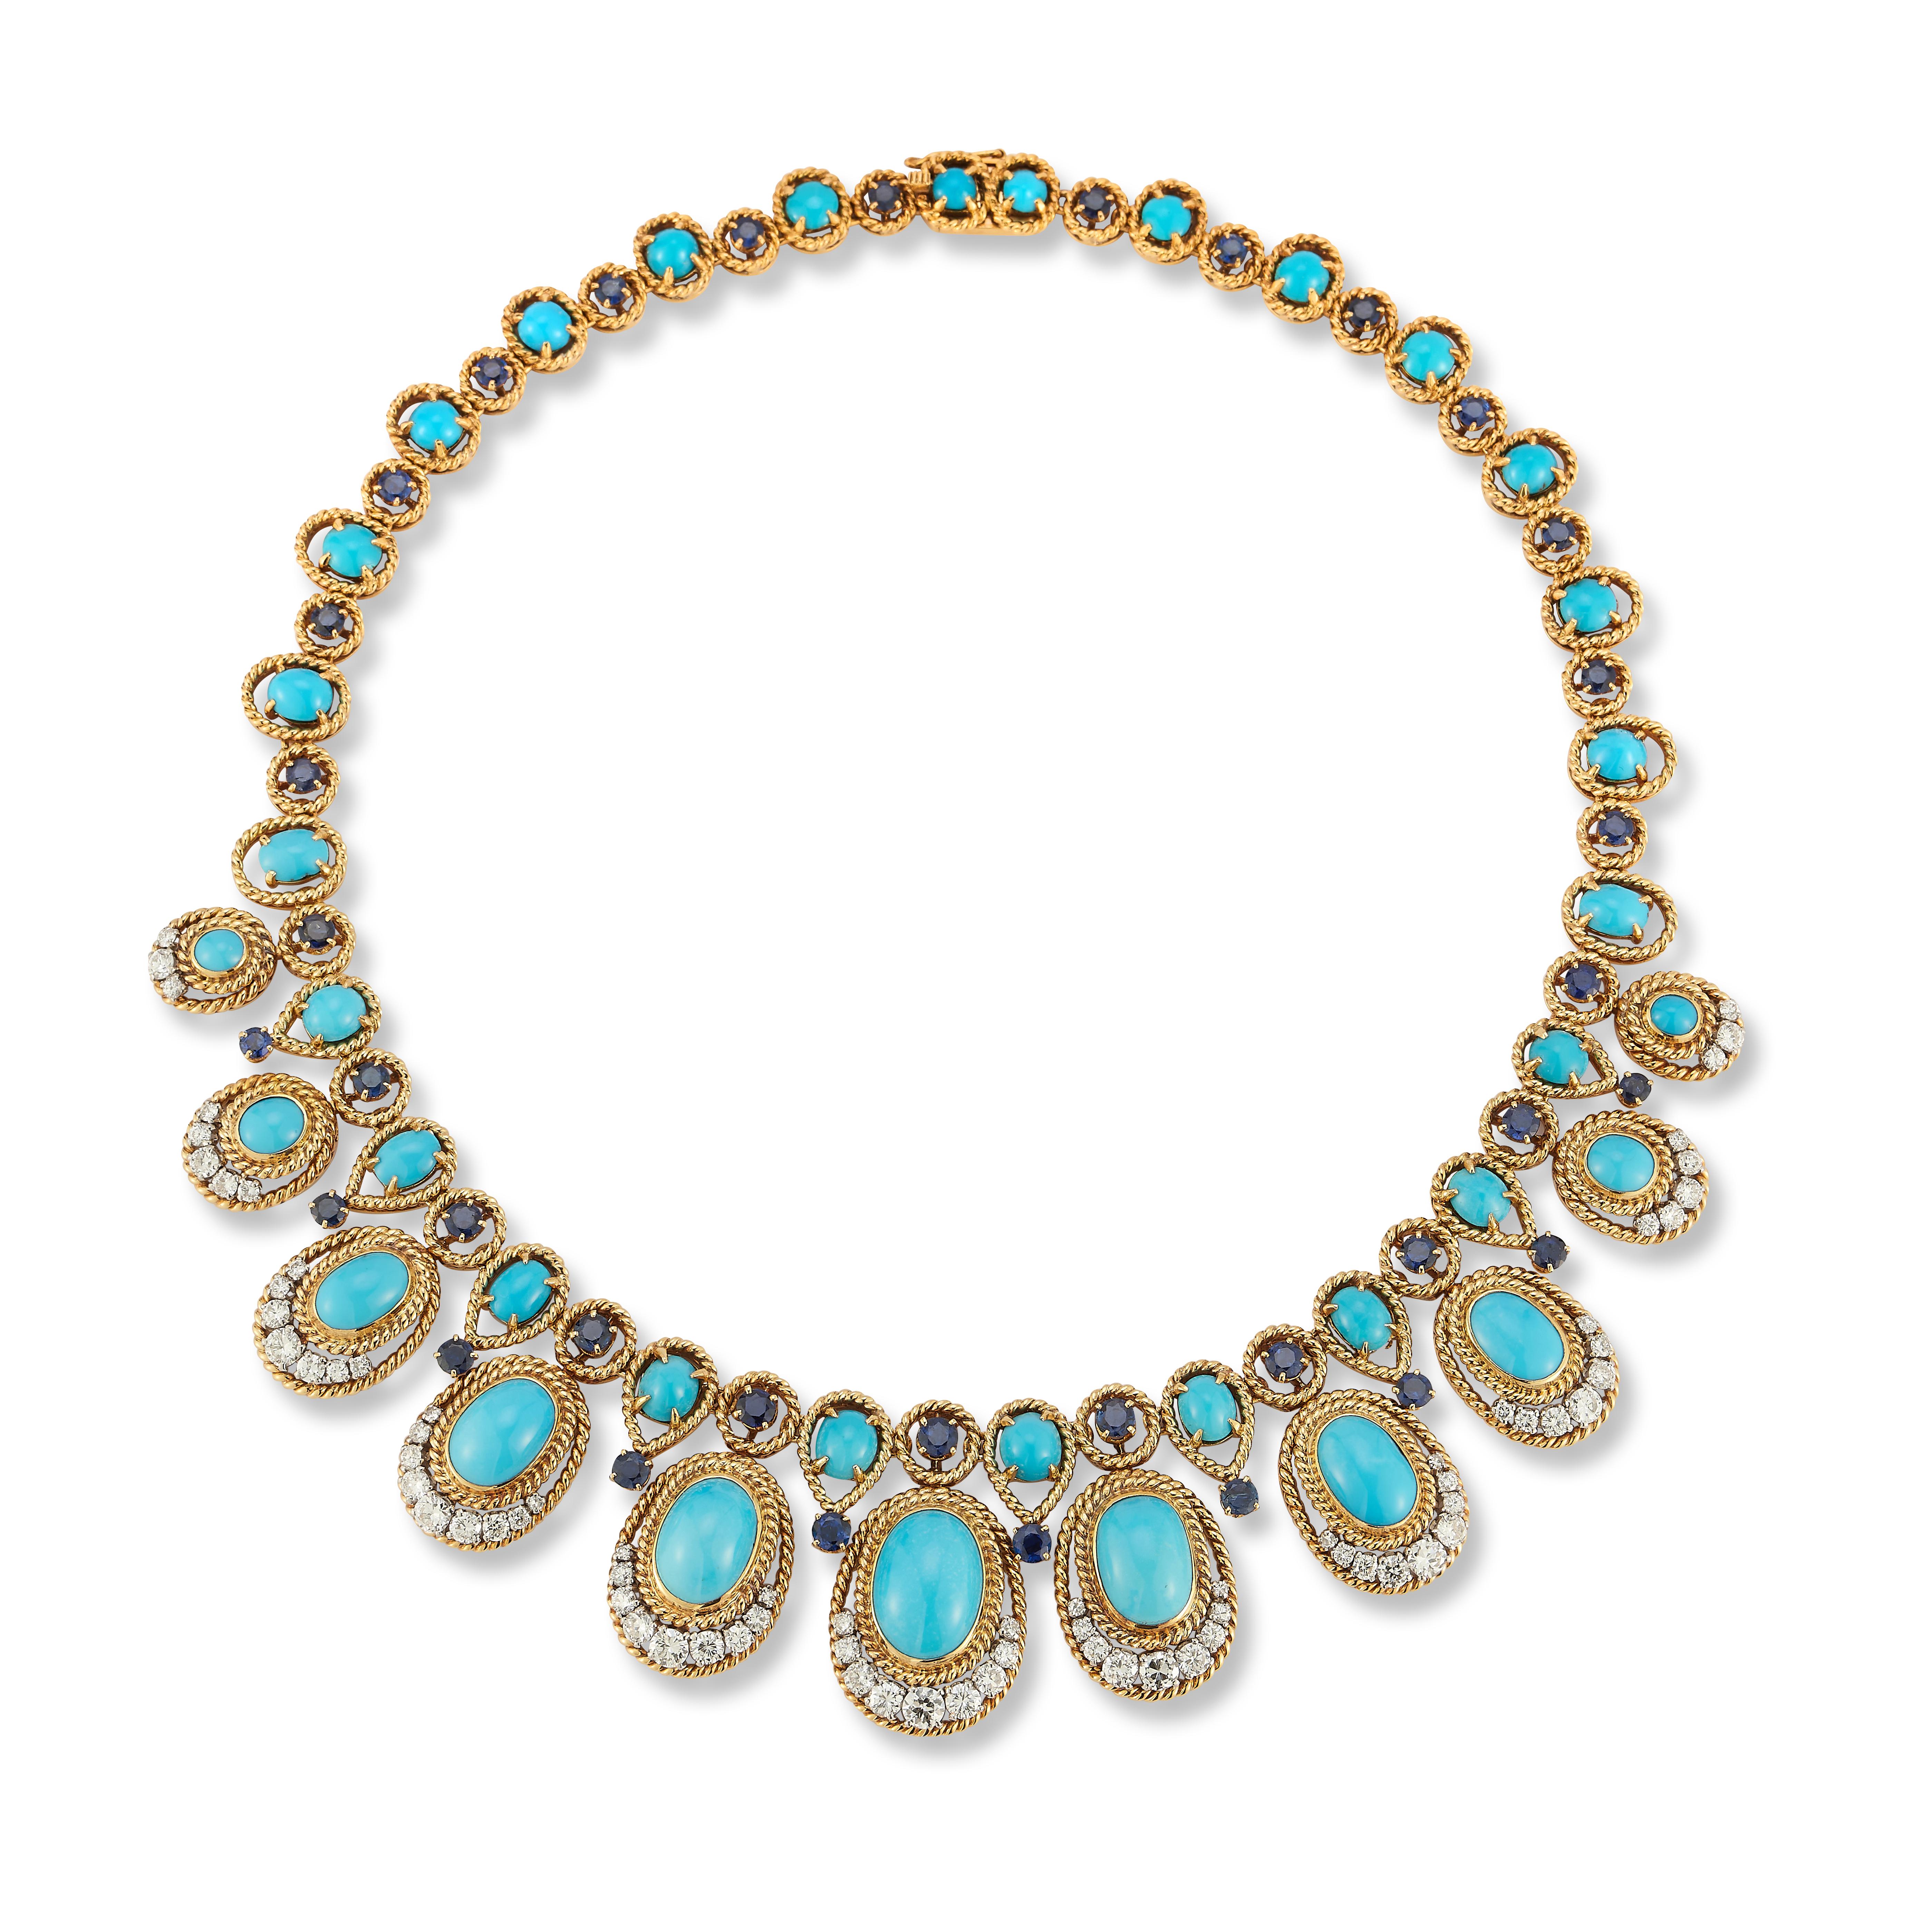 Van Cleef & Arpels Turquoise Sapphire & Diamond Necklace

An 18 karat gold and platinum necklace set with cabochon turquoises, round cut sapphires, and round cut diamonds

Signed Van Cleef & Arpels and numbered

Makers mark for Péry

Length: